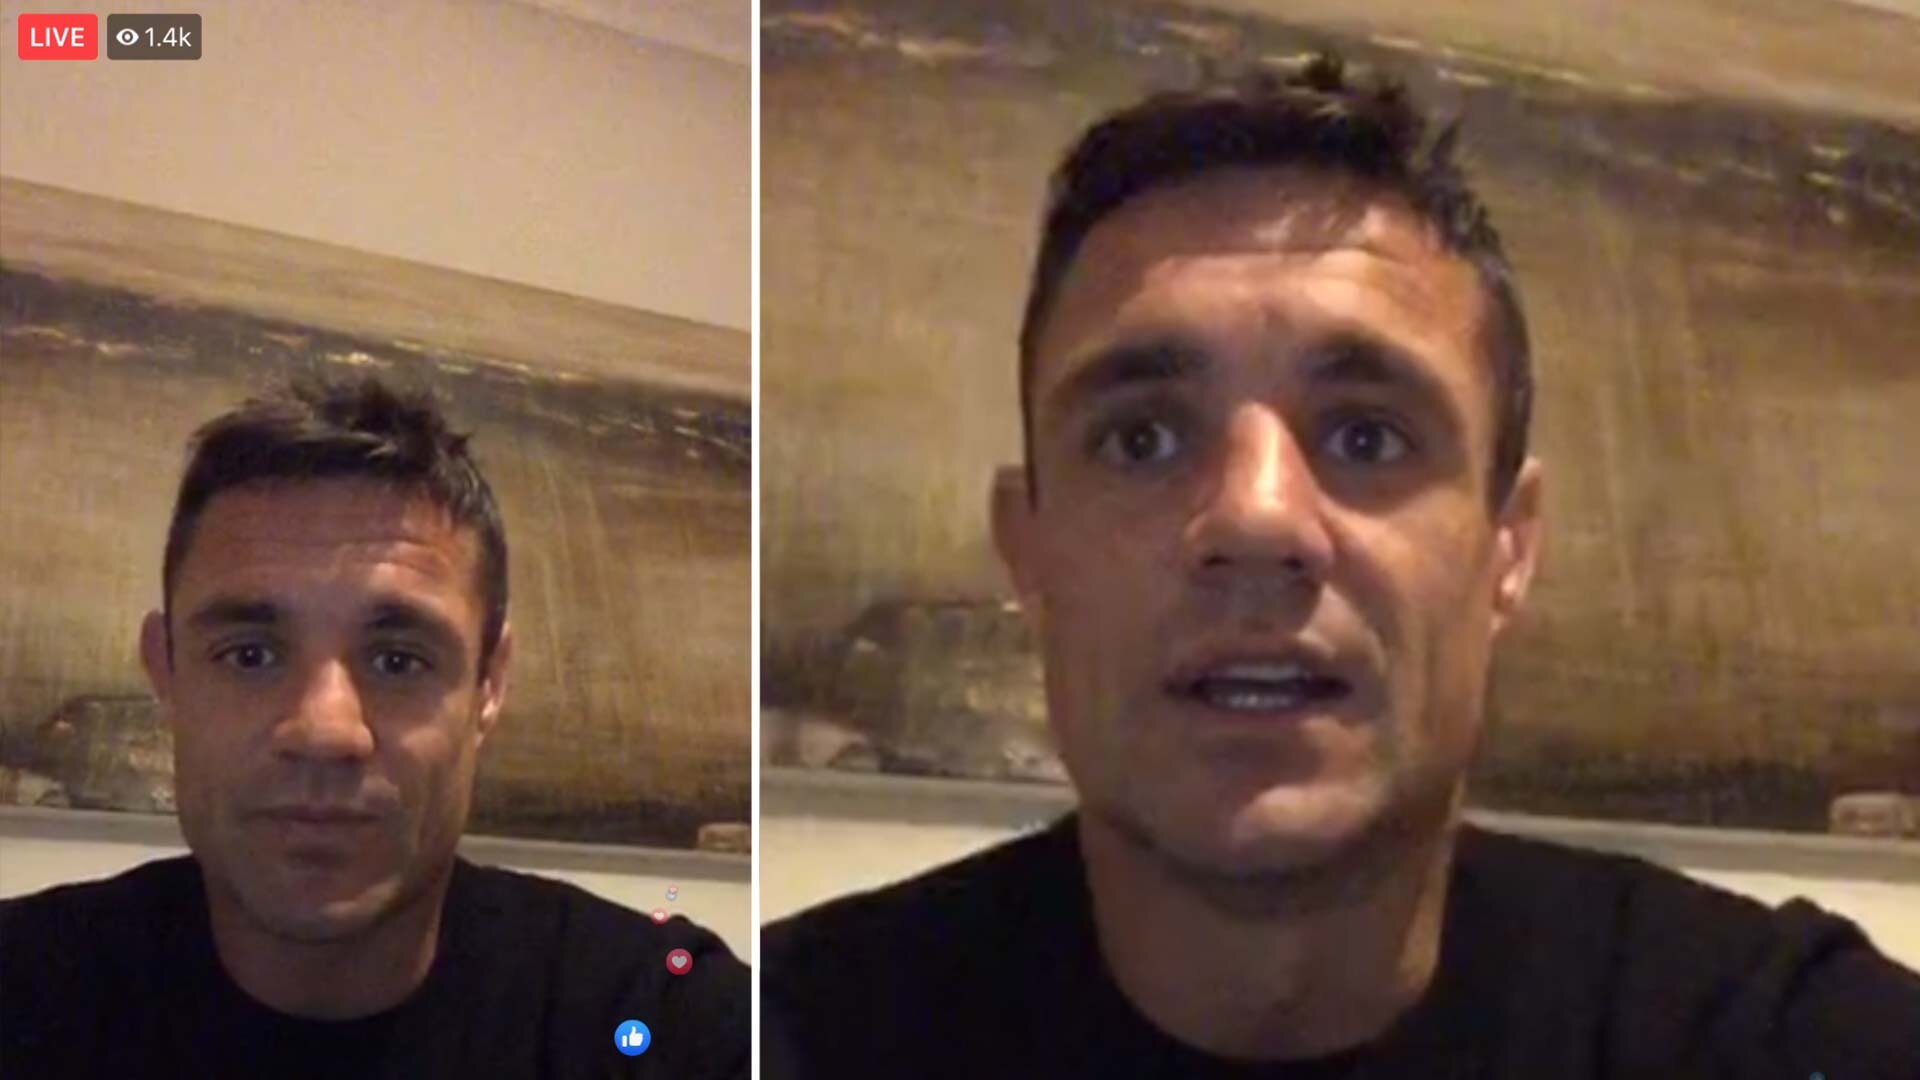 Dan Carter live stream goes off the rails as hundreds of trolls descend on the video